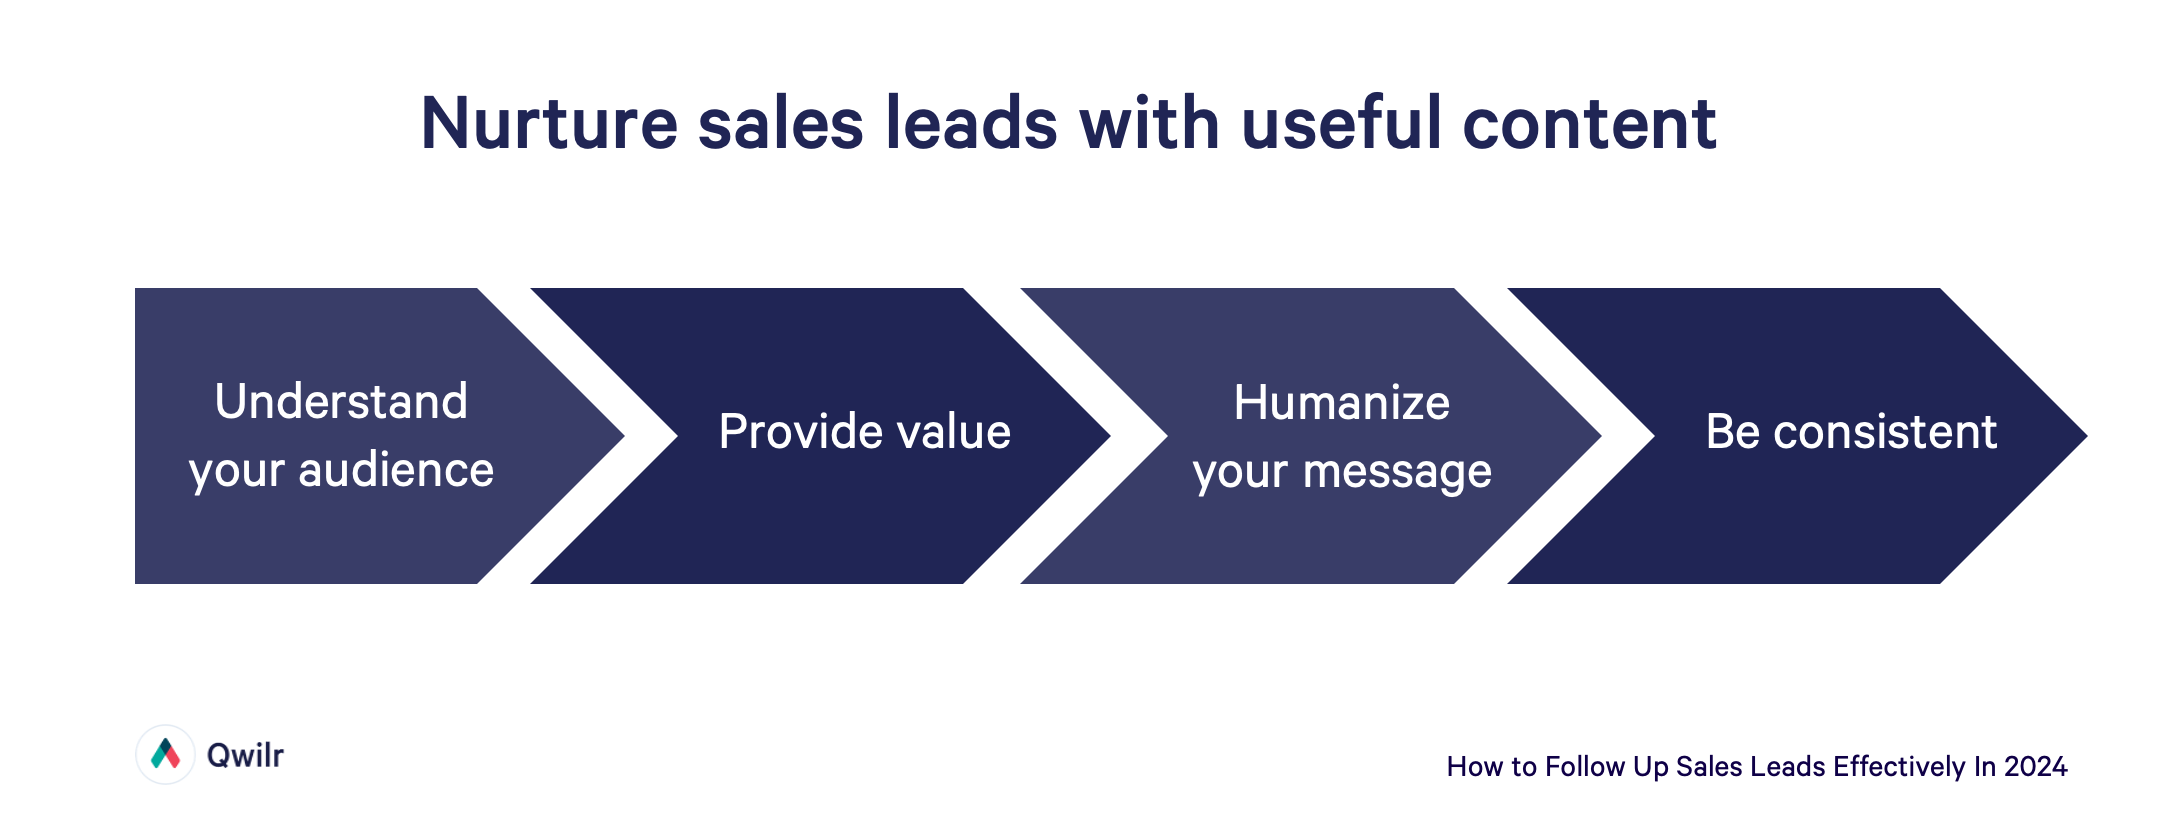 a diagram showing how to nurture sales leads with useful content